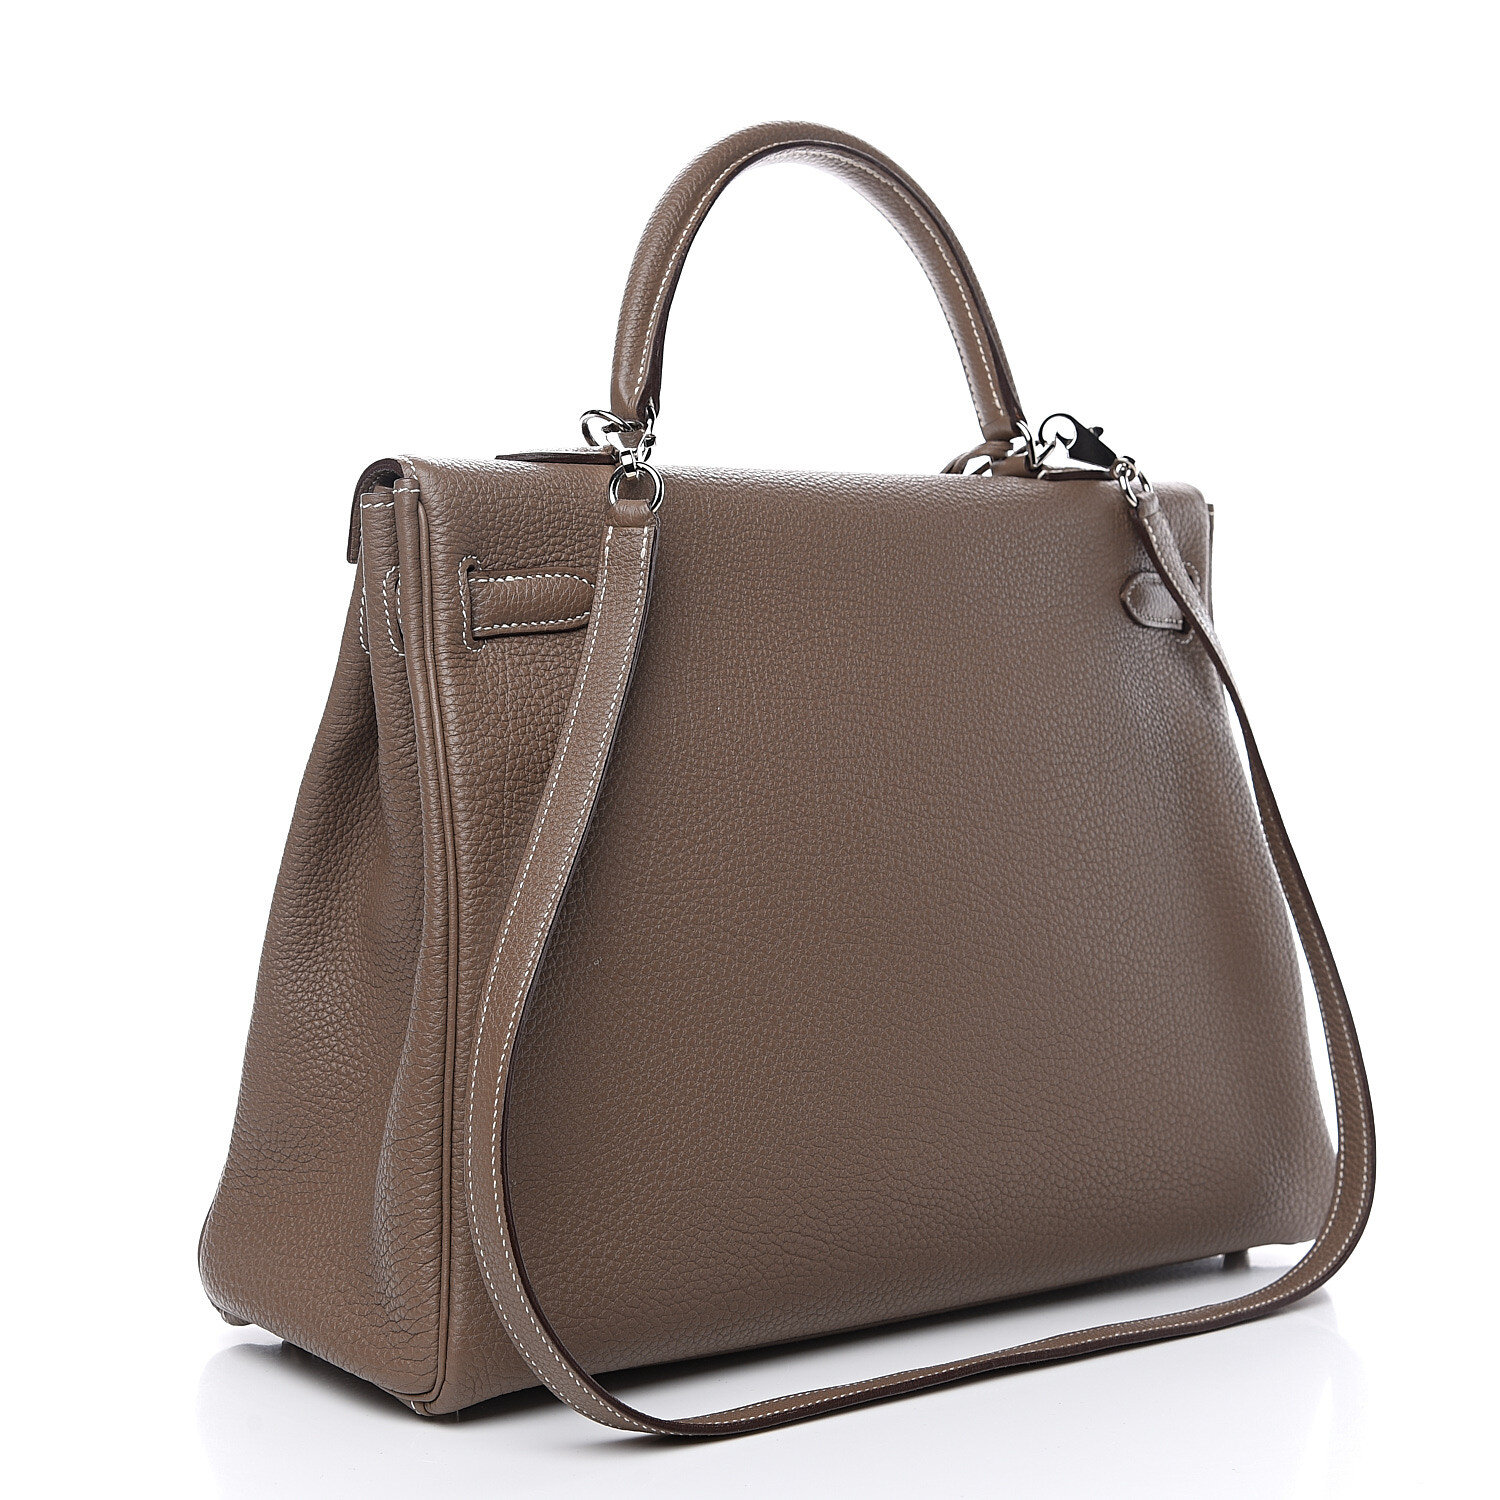 hermes-togo-kelly-retourne-35-etoupe-Available-For-Sale-Collecting-Luxury-2.jpg